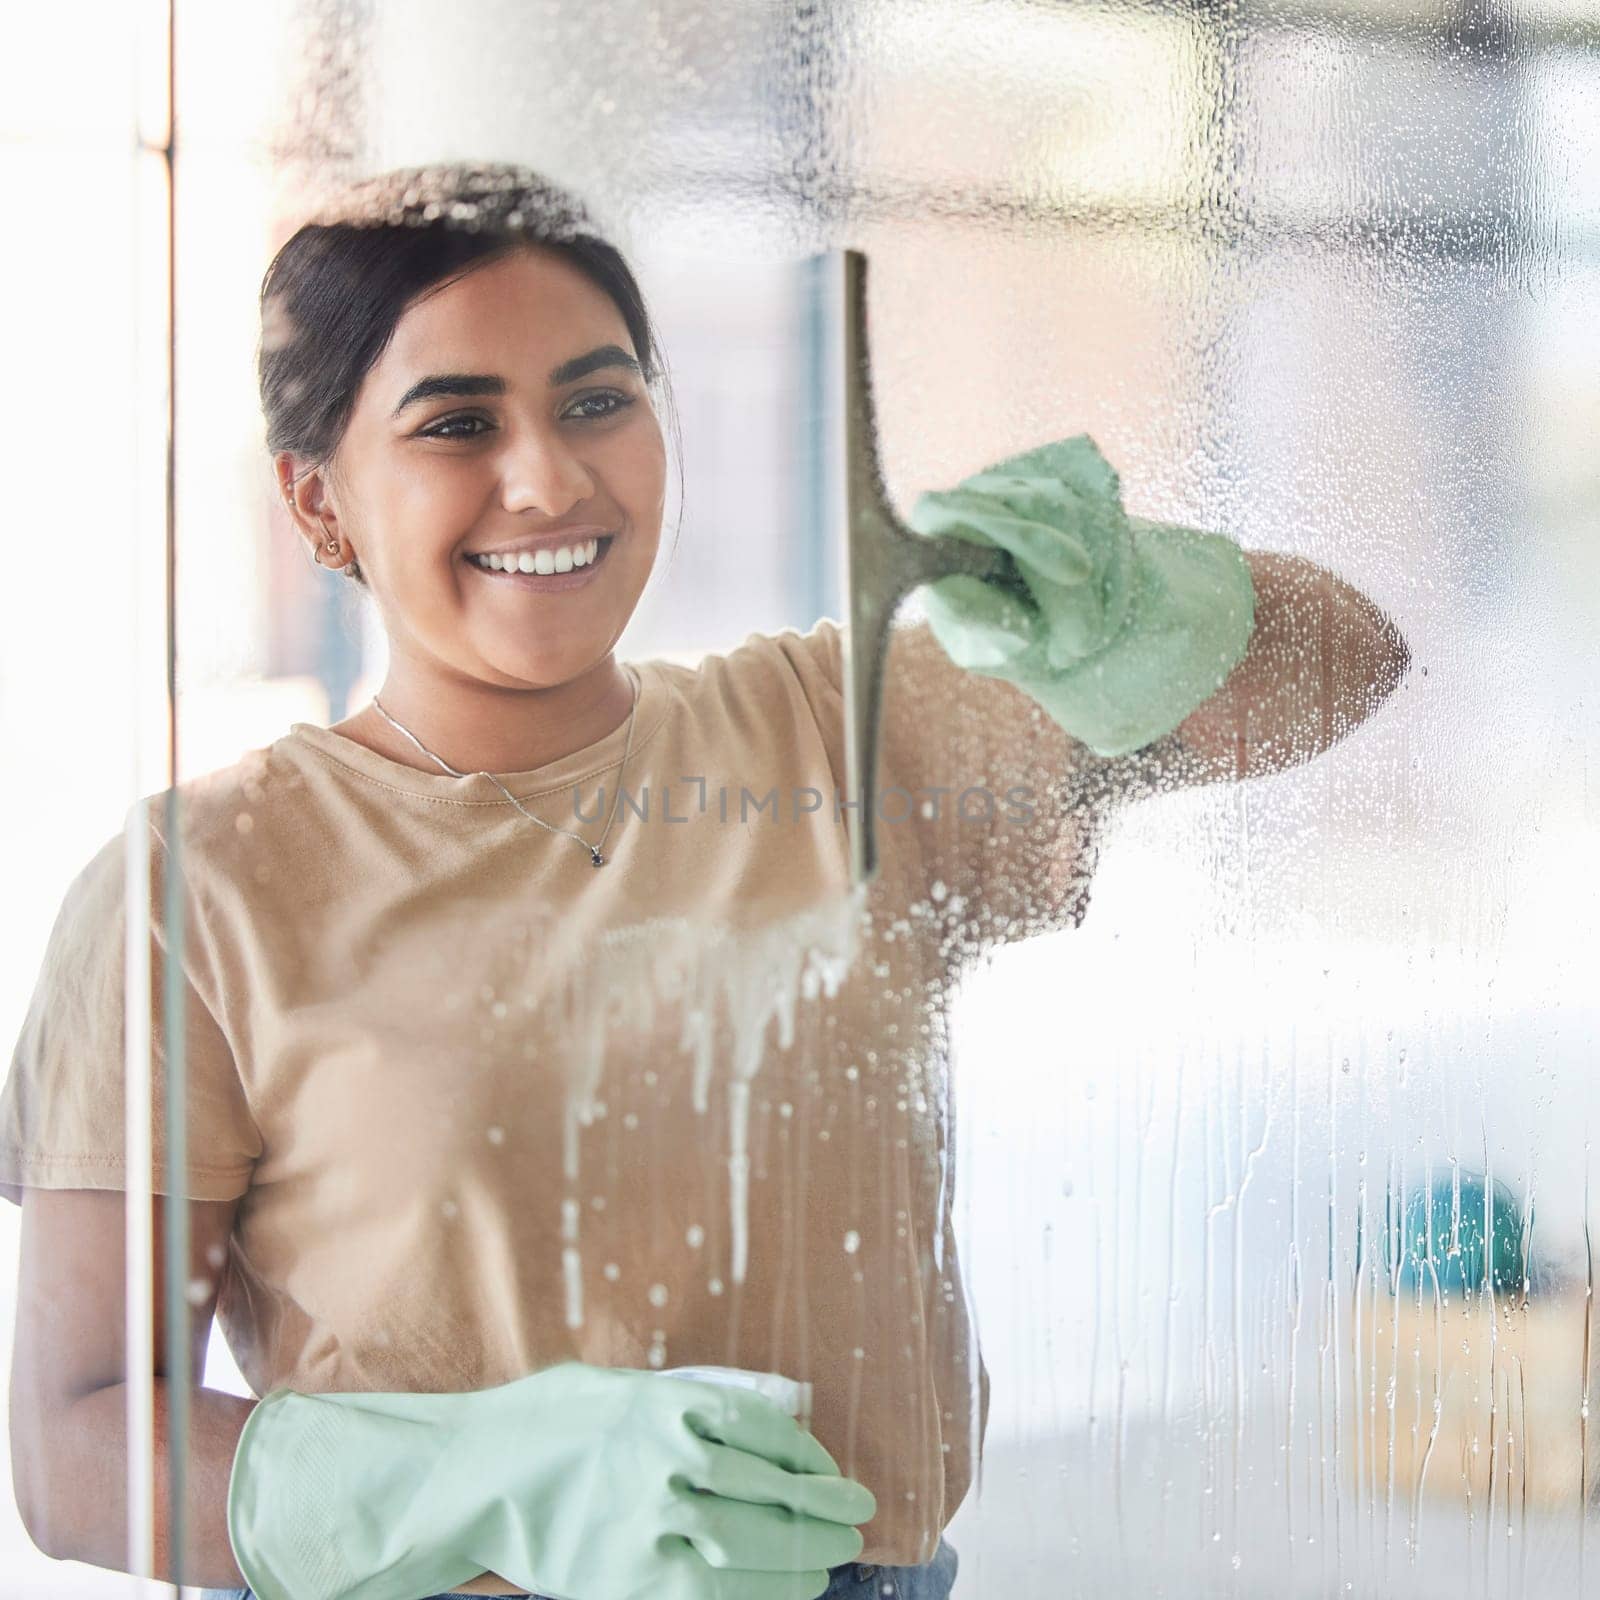 Happy, smile and girl cleaning window with spray bottle and soap or detergent, housekeeper in home or hotel. Housework, smudge and woman or professional cleaner service washing off glass in apartment.